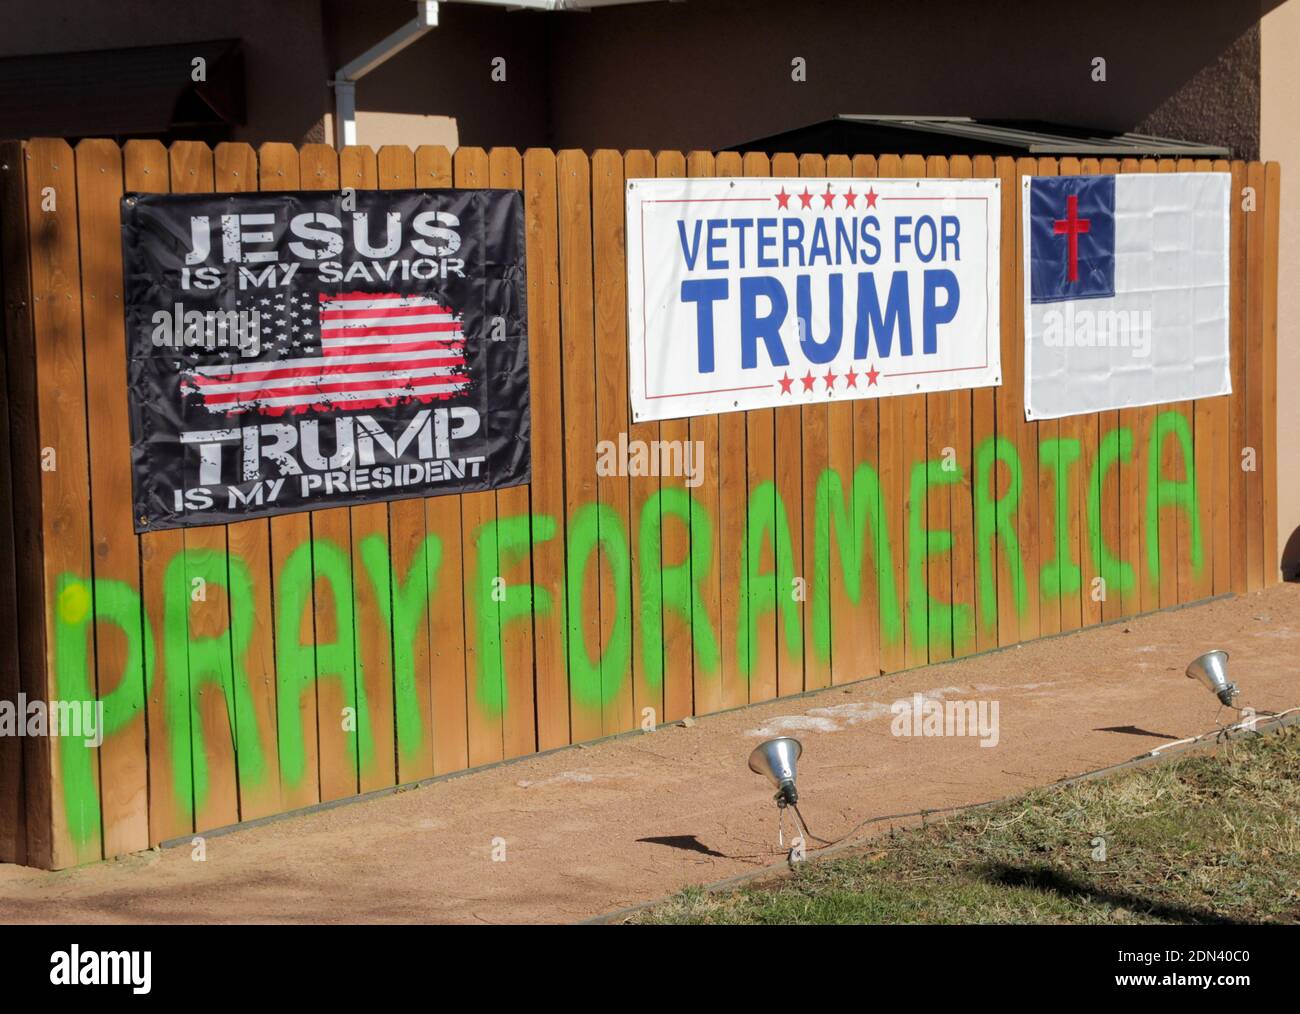 An Alpine, Texas, supporter of President Donald Trump uses his home to publicly convey his political support and choices. Stock Photo